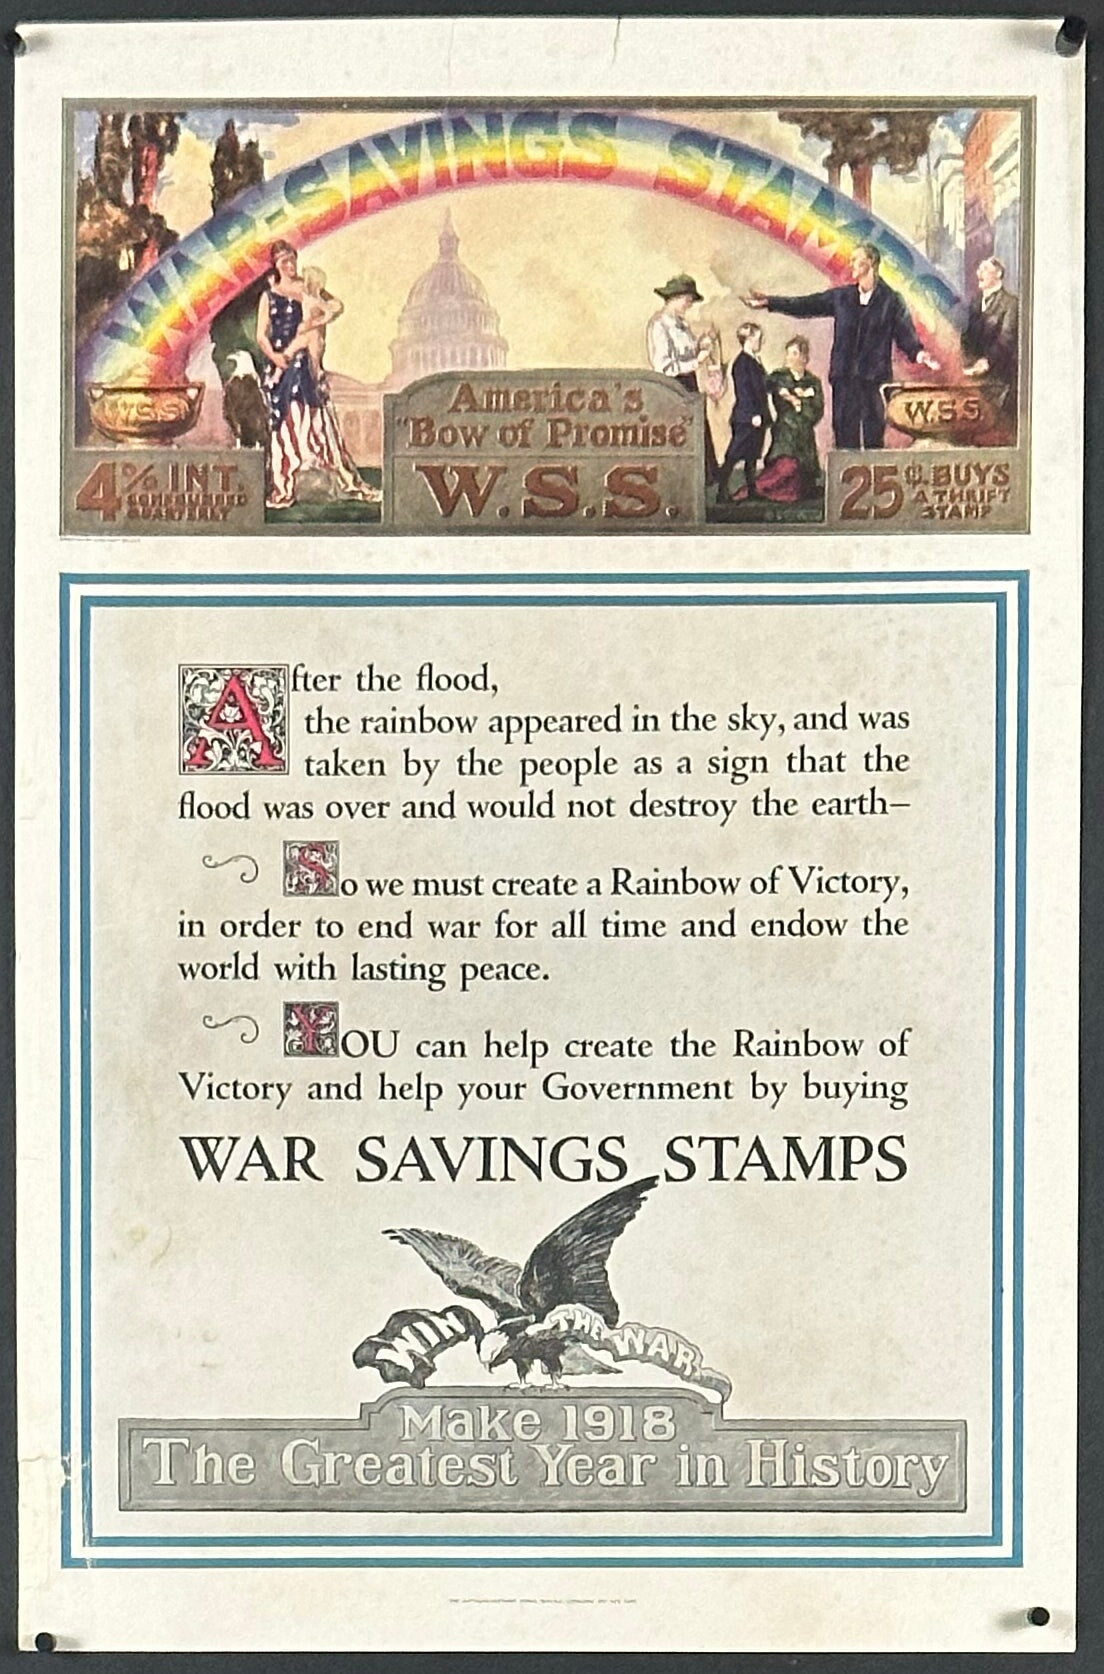 "U.S. Rainbow of Victory" WWI War Savings Stamps Home Front Poster by Urquhart Wilcox (1918) - posterpalace.com